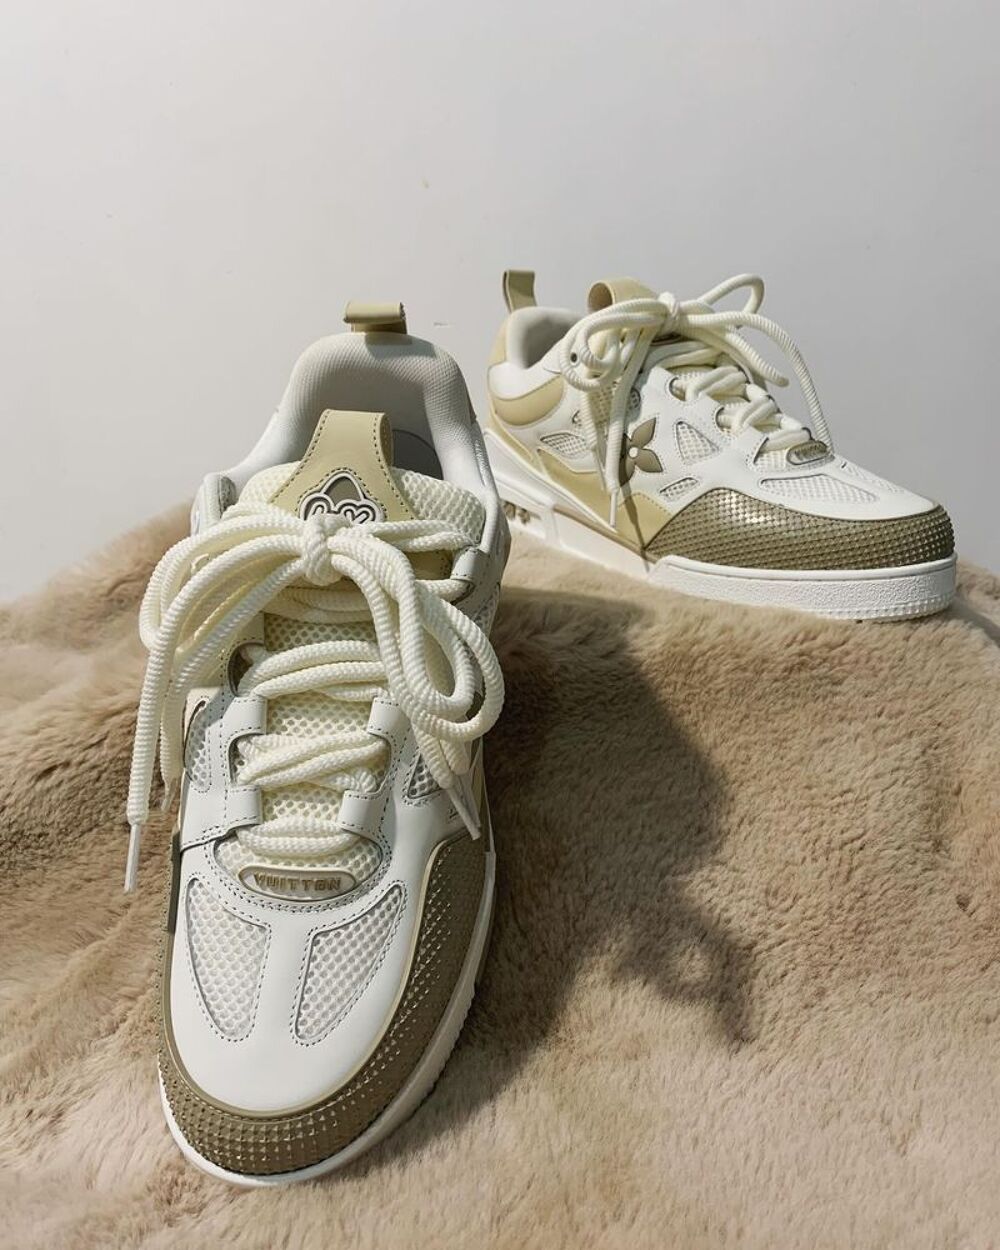 Chaussures Sneakers Louis Vuitton Beige d'occasion